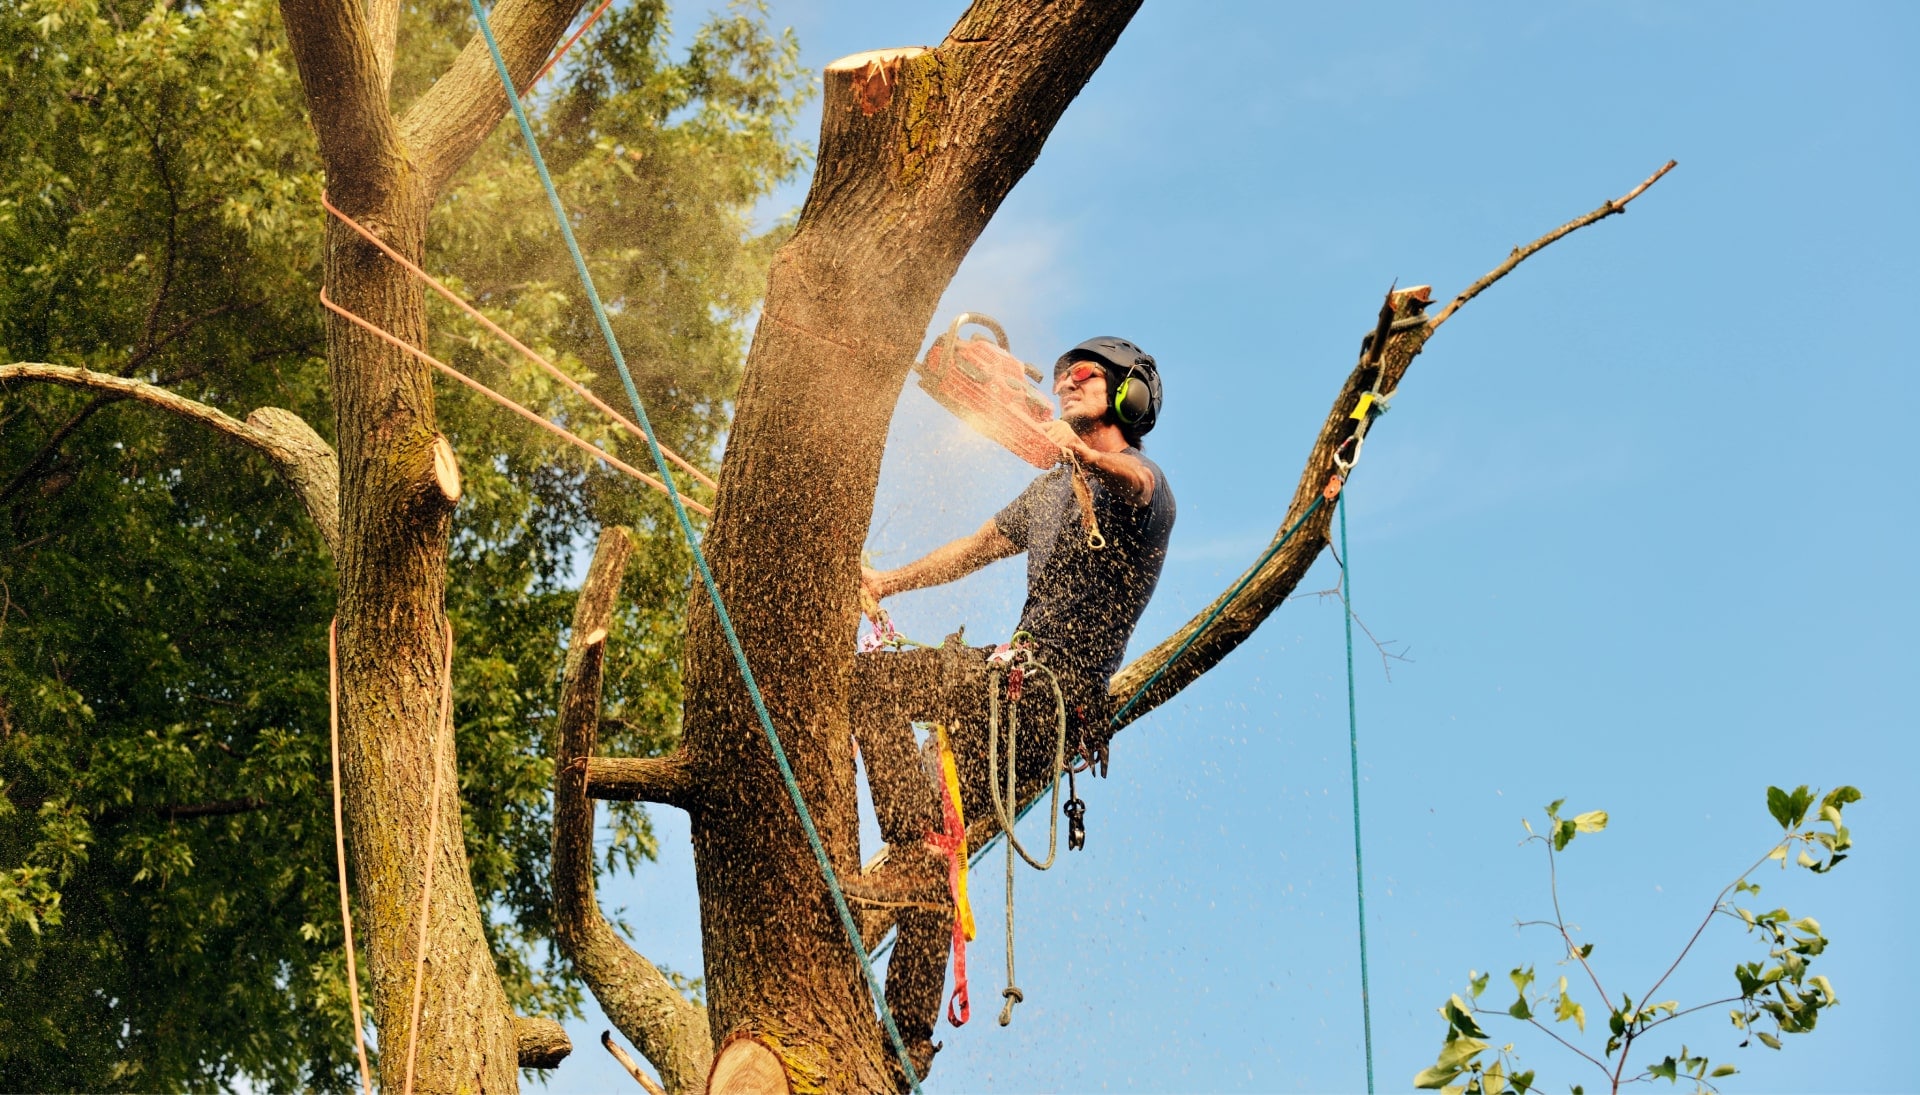 Grand Rapids tree removal experts solve tree issues.